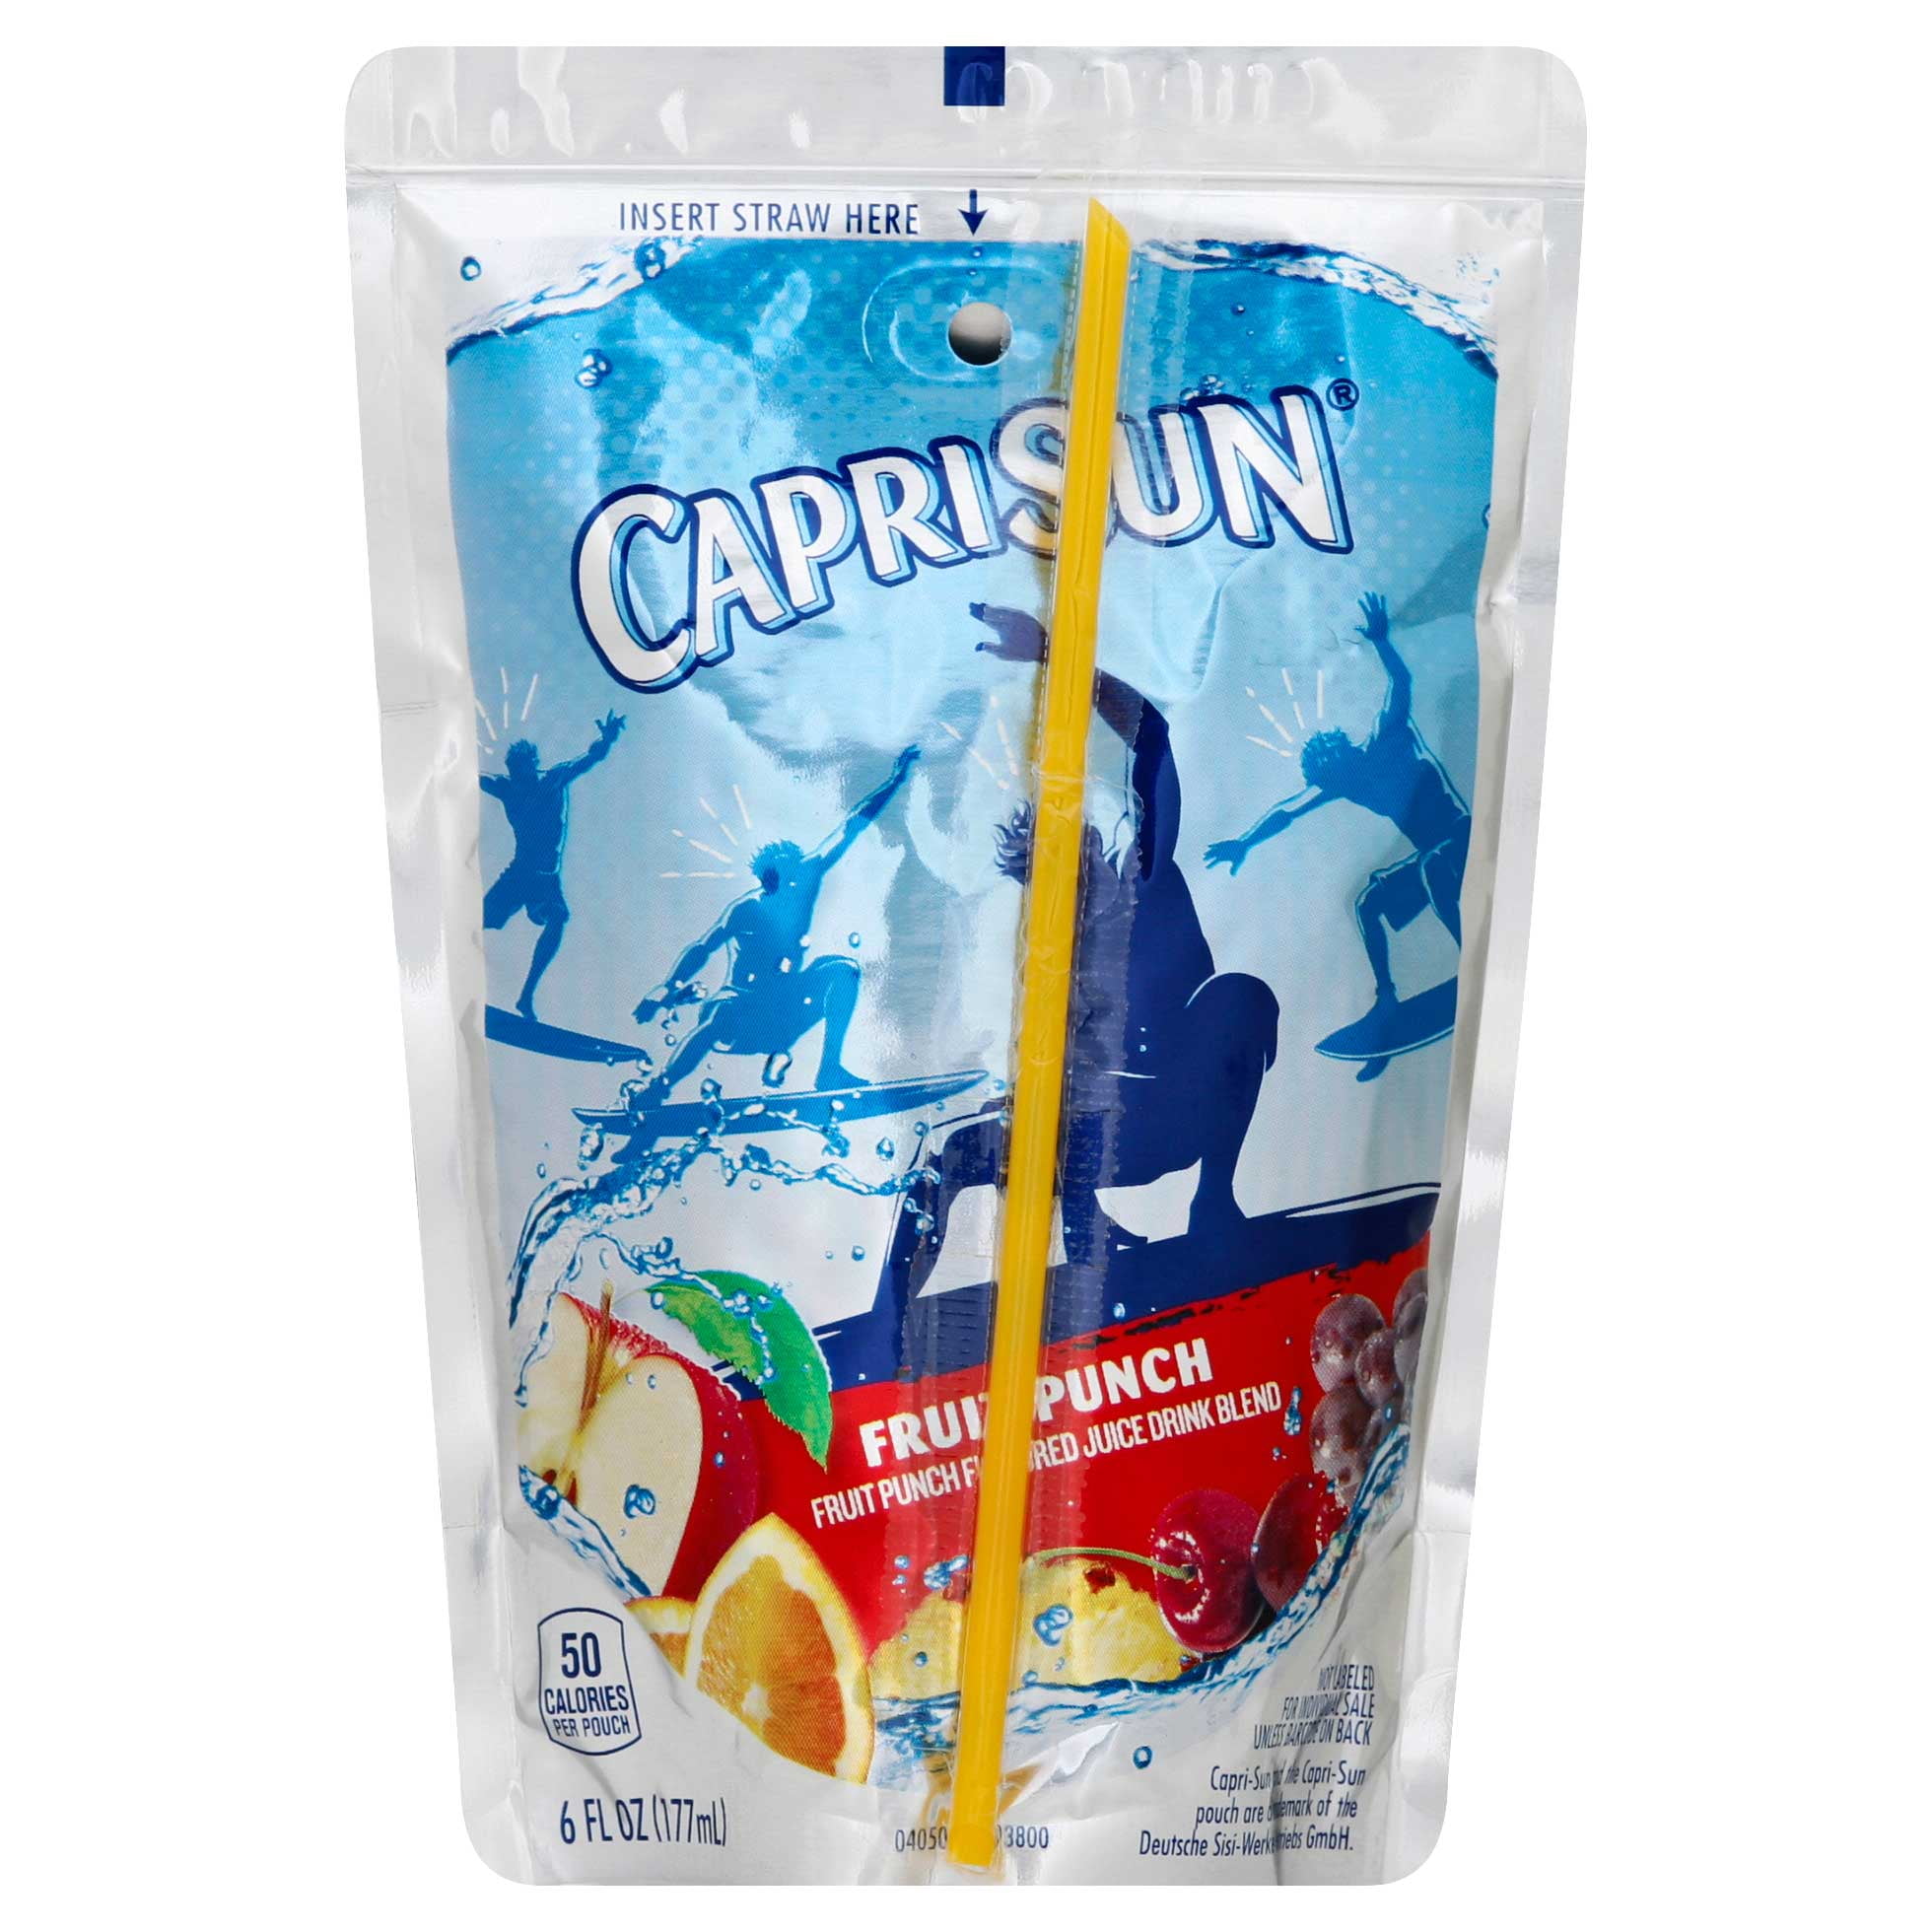 Capri Sun Fruit Punch 6oz 10pk : Drinks fast delivery by App or Online